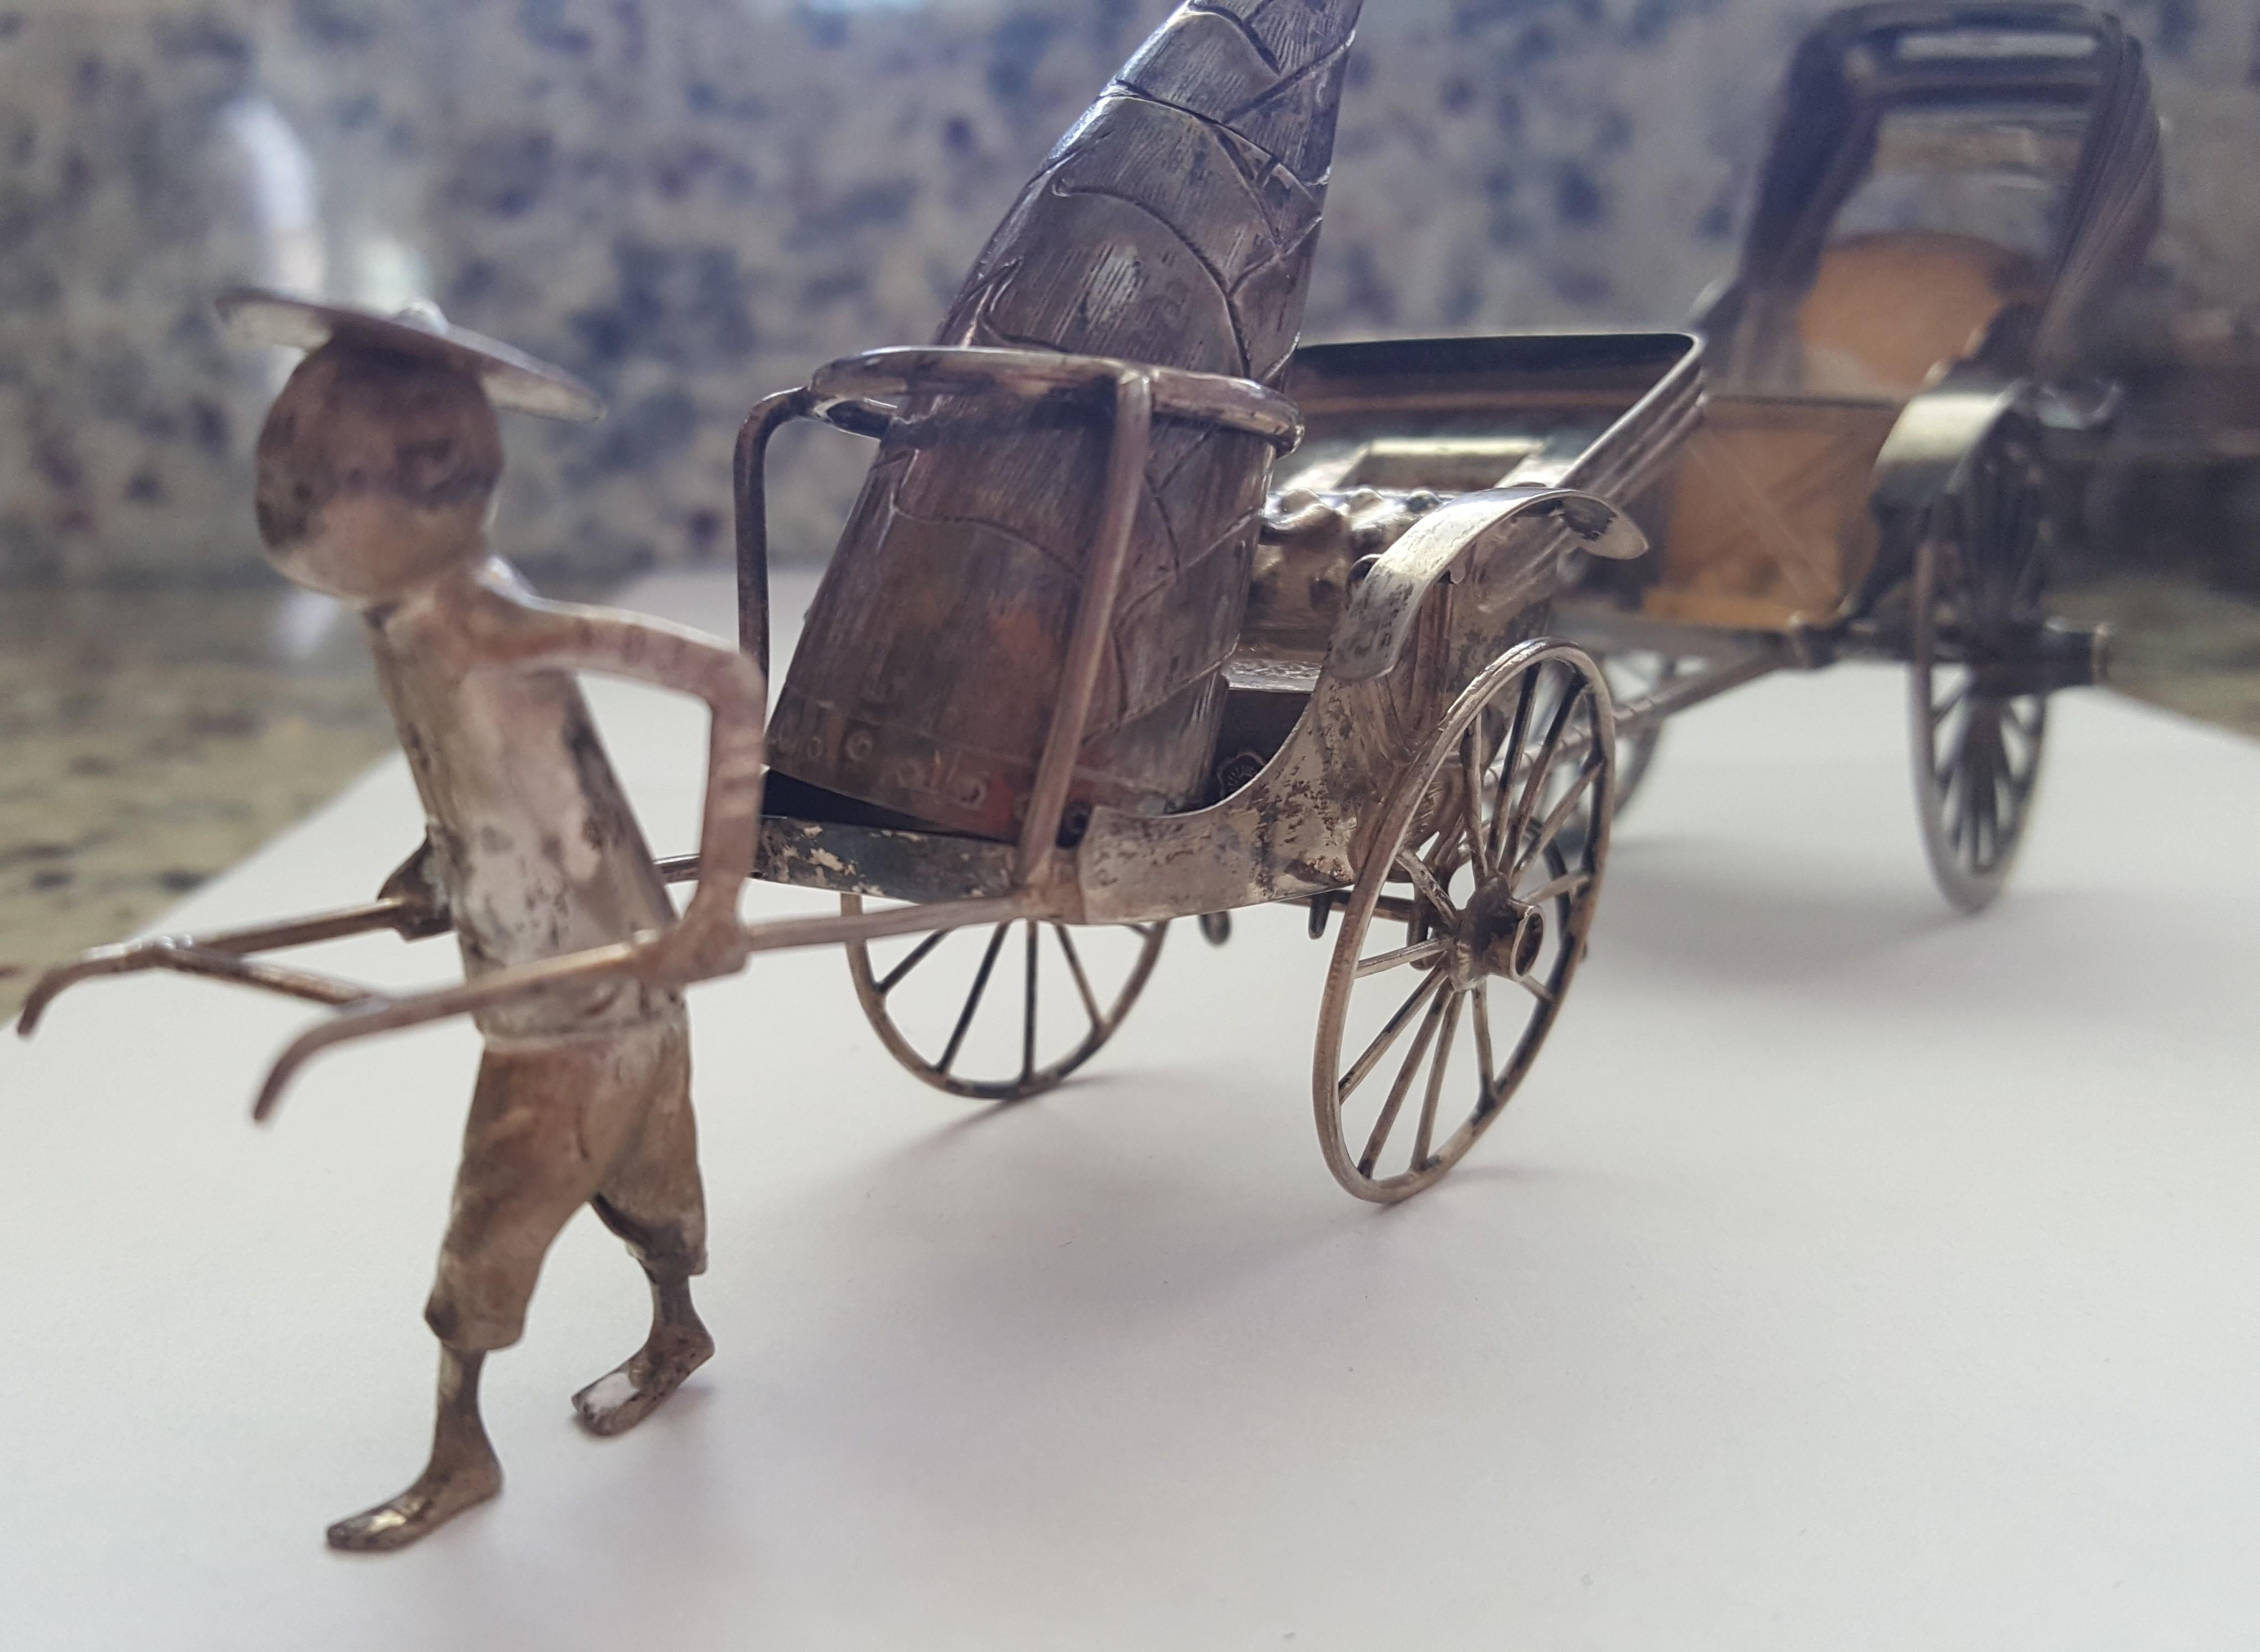 Vintage Silver Salt and Pepper Shaker, Asian, Two Rickshaw Carts pulled by Man, 116.50 Grams, Silver, Solid Silver, Sterling Silver, Shakers, these are about 8 inches long laid out.We are selling other Asian salt and pepper shakers on our 1stDibs